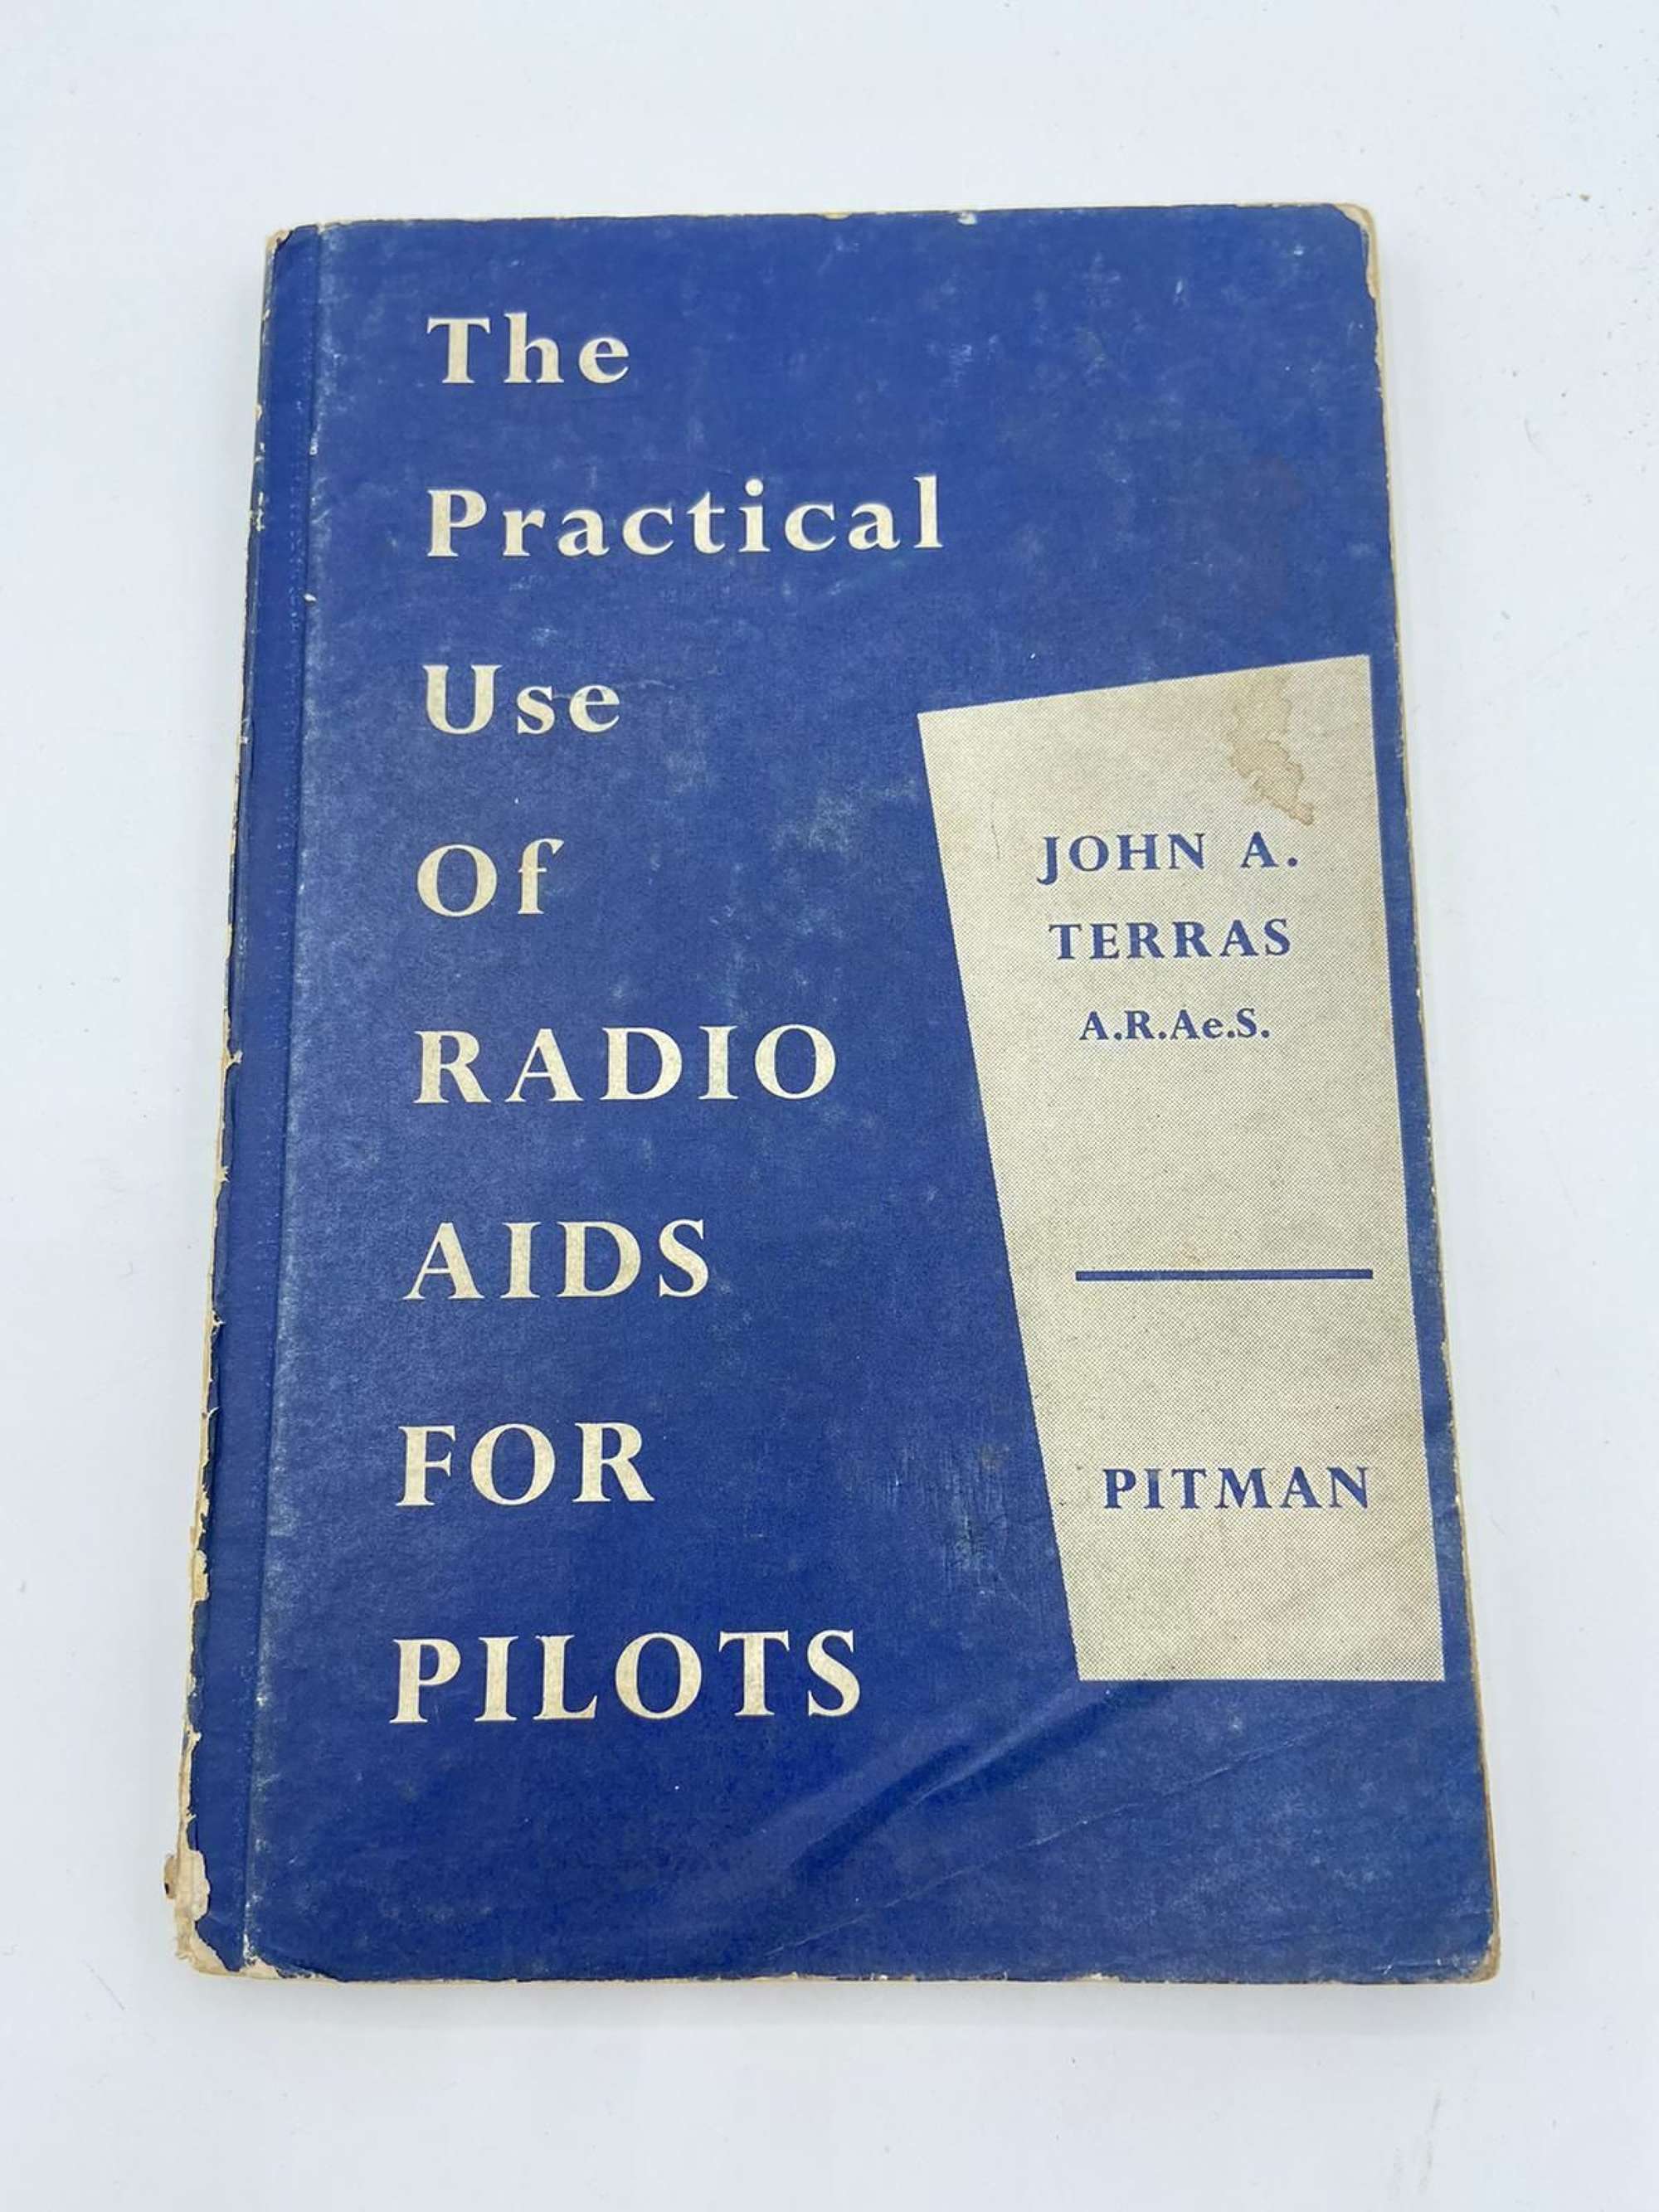 Royal Air Force 1960 The Practical Use Of Radio Aids For Pilots Manual